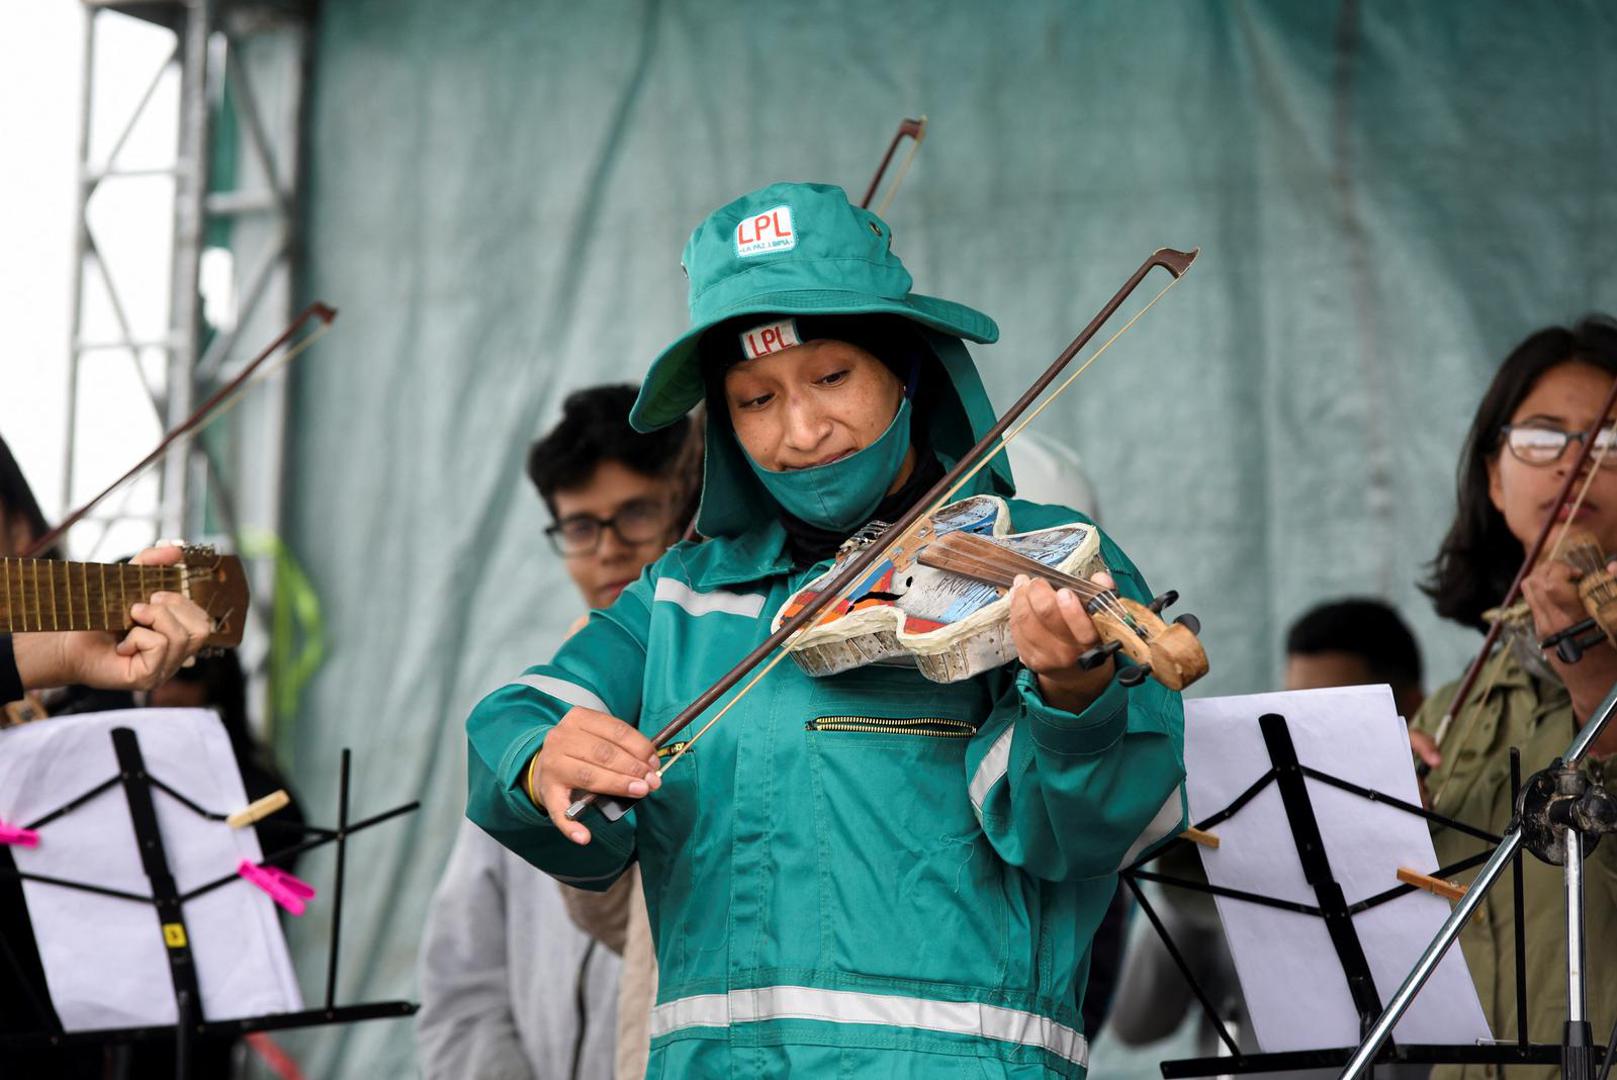 Yessica Llanco, a recycler from the city of La Paz, learns to play the violin made with recycled materials with the Paraguayan Cateura Recycled Instruments Orchestra, at the Sak'a Churu landfill in Alpacoma, in La Paz, Bolivia on February 27, 2023. REUTERS/Claudia Morales Photo: CLAUDIA MORALES/REUTERS